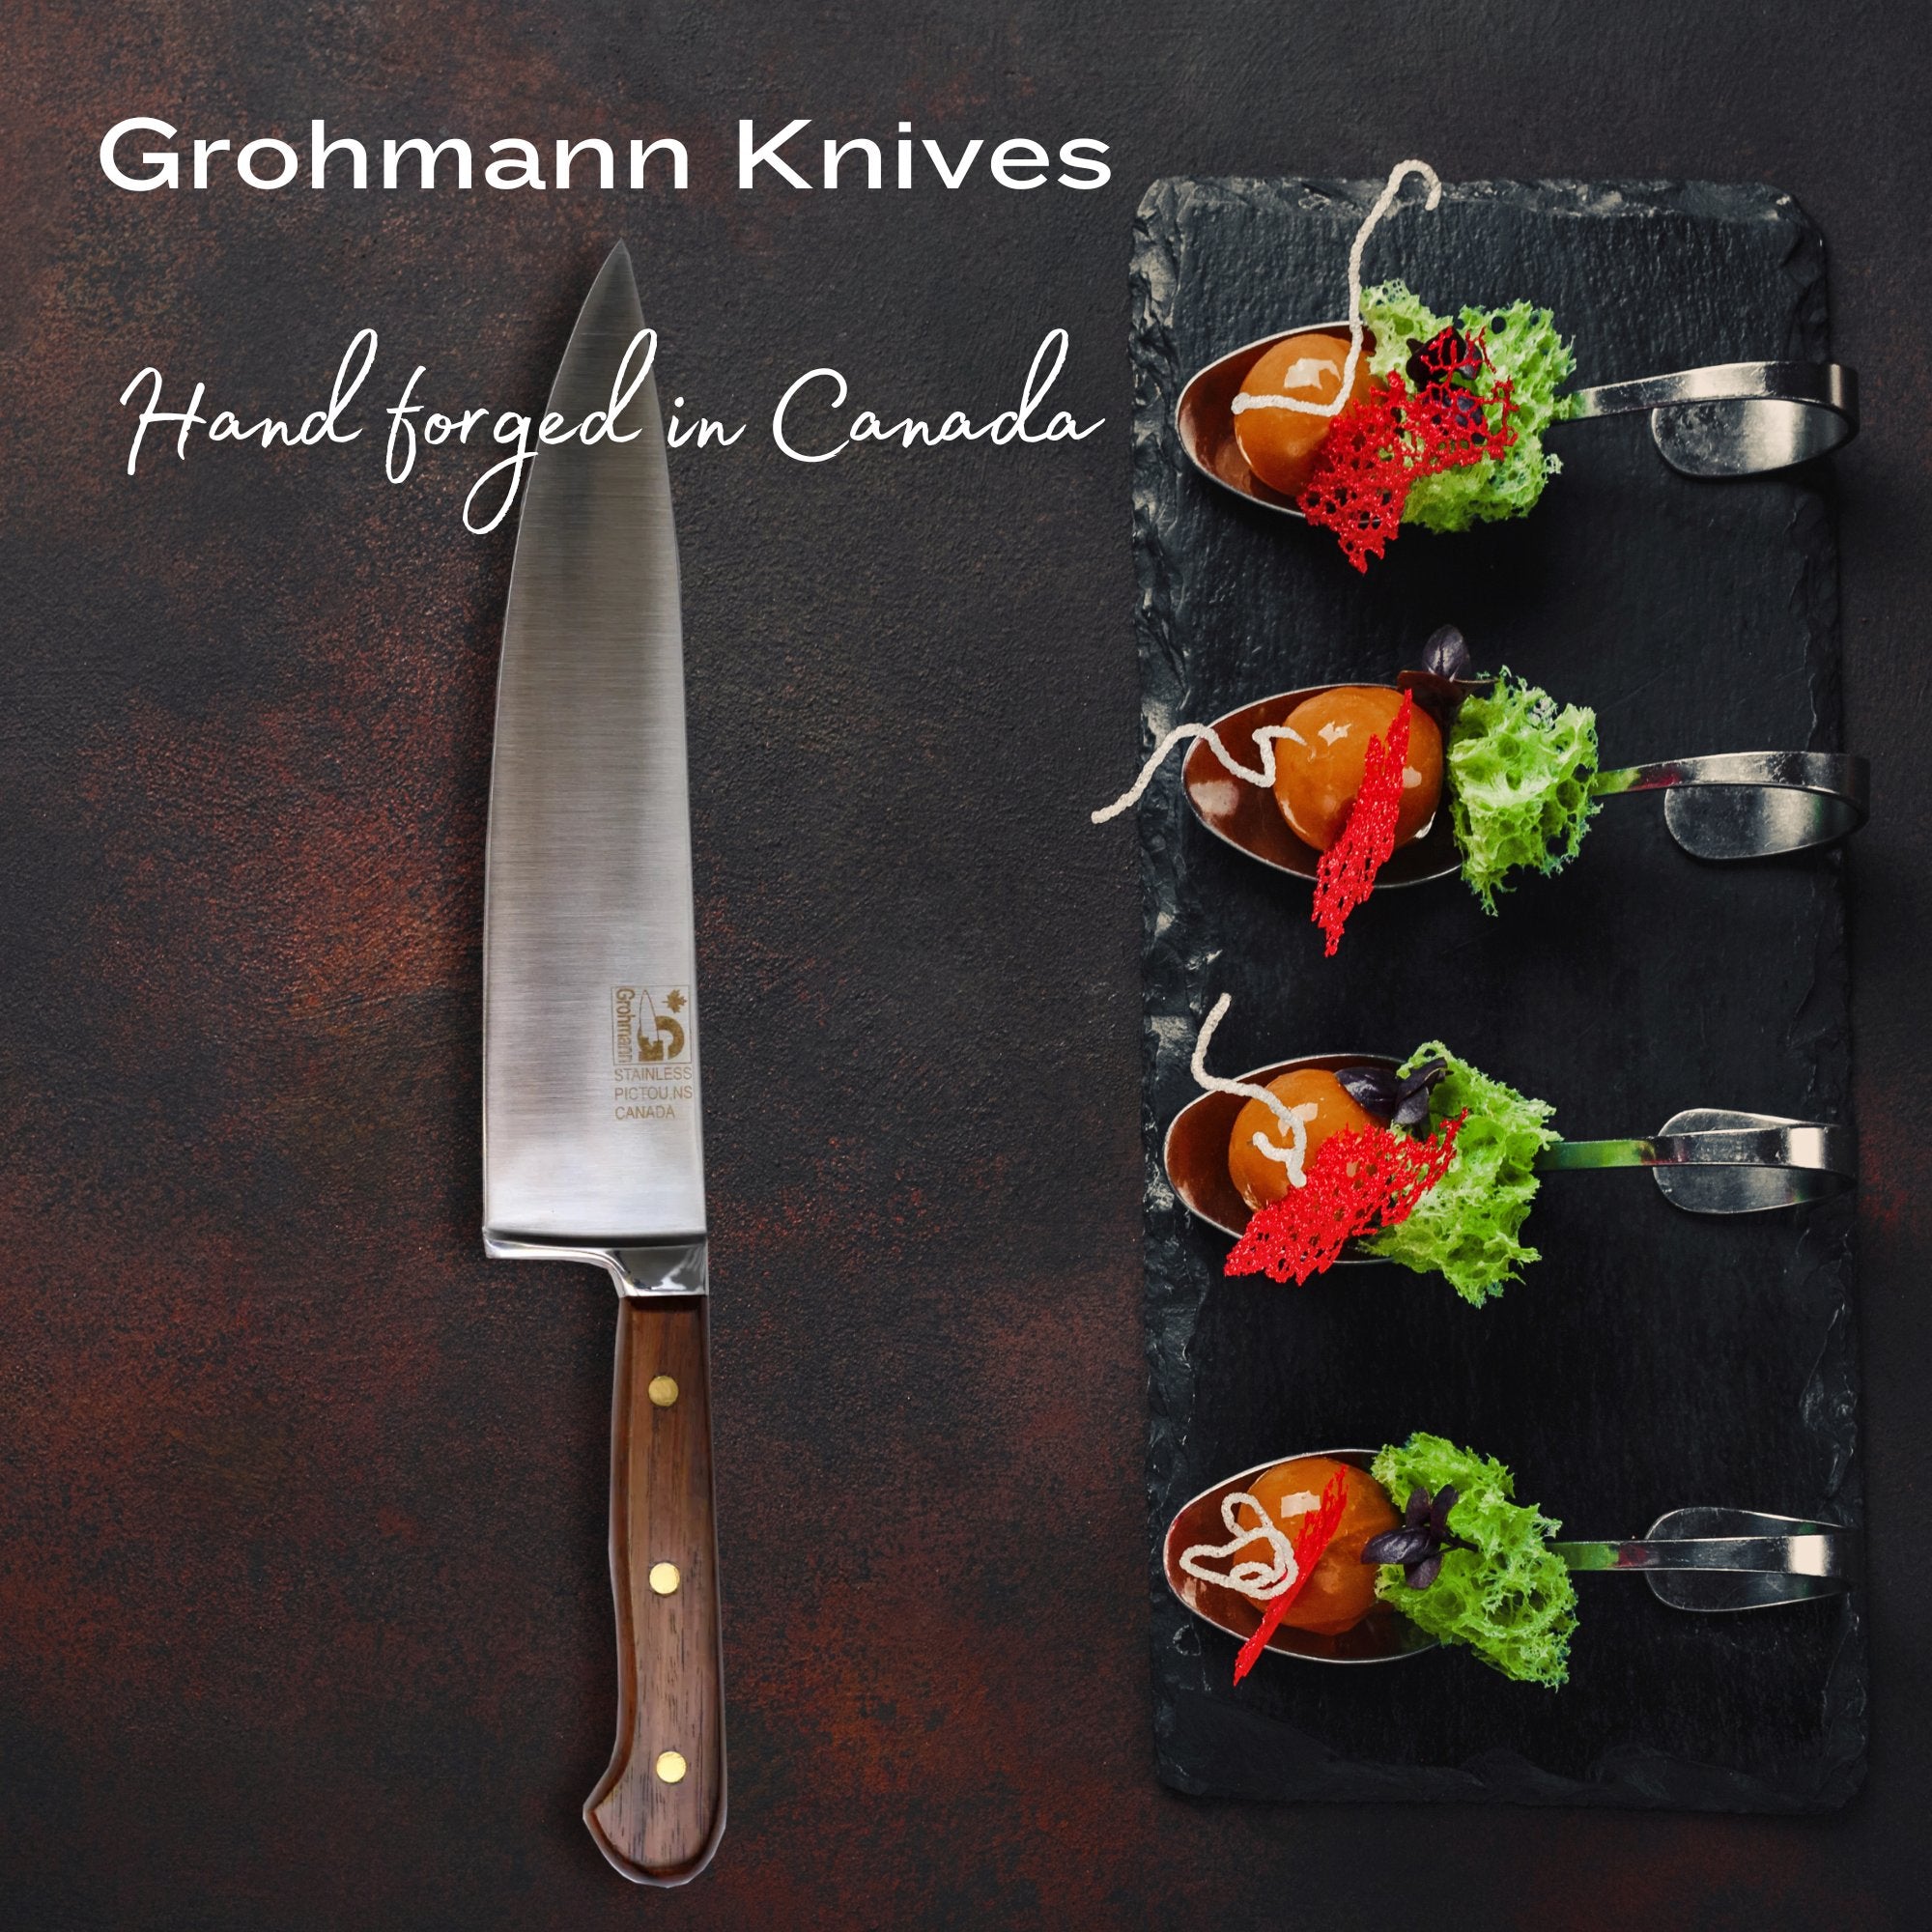 Grohmann Knives | Hand forged in Canada